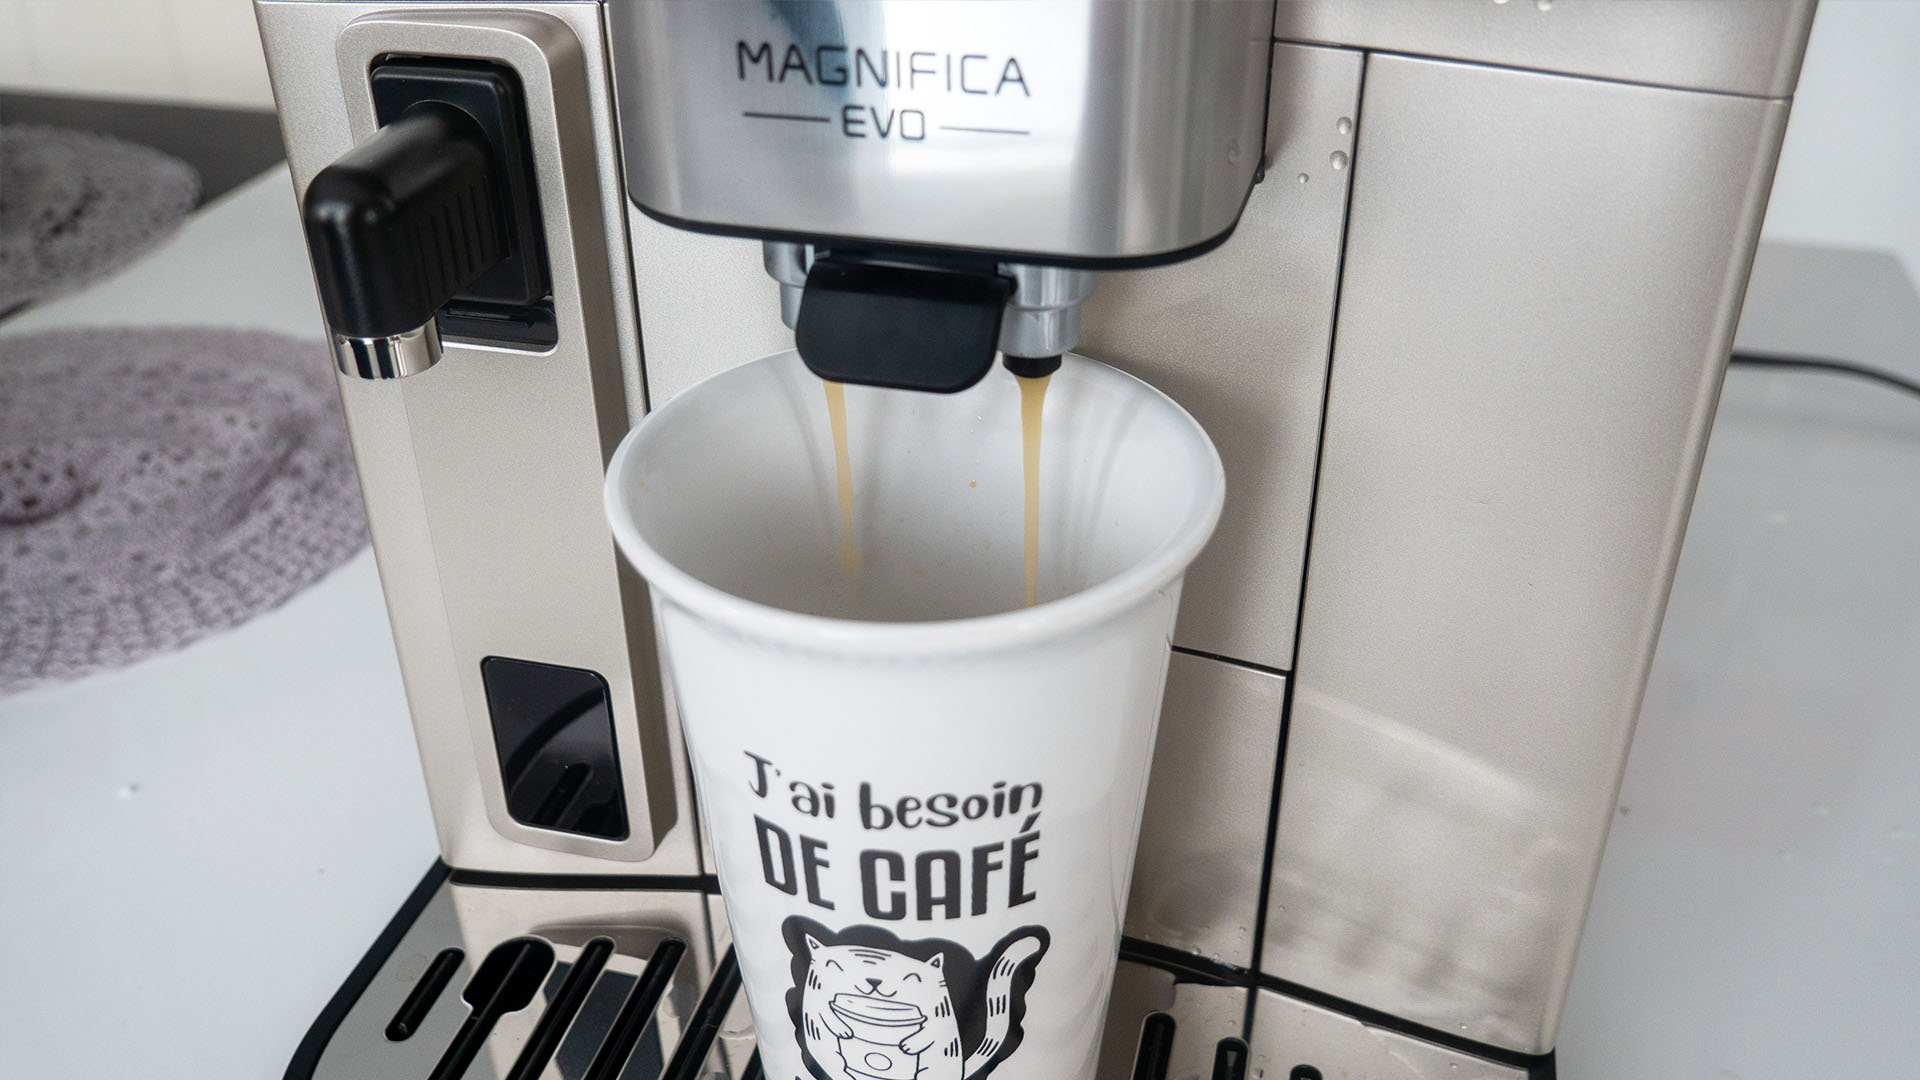 Image of De'Longhi Magnifica Evo expresso machine with cup of coffee